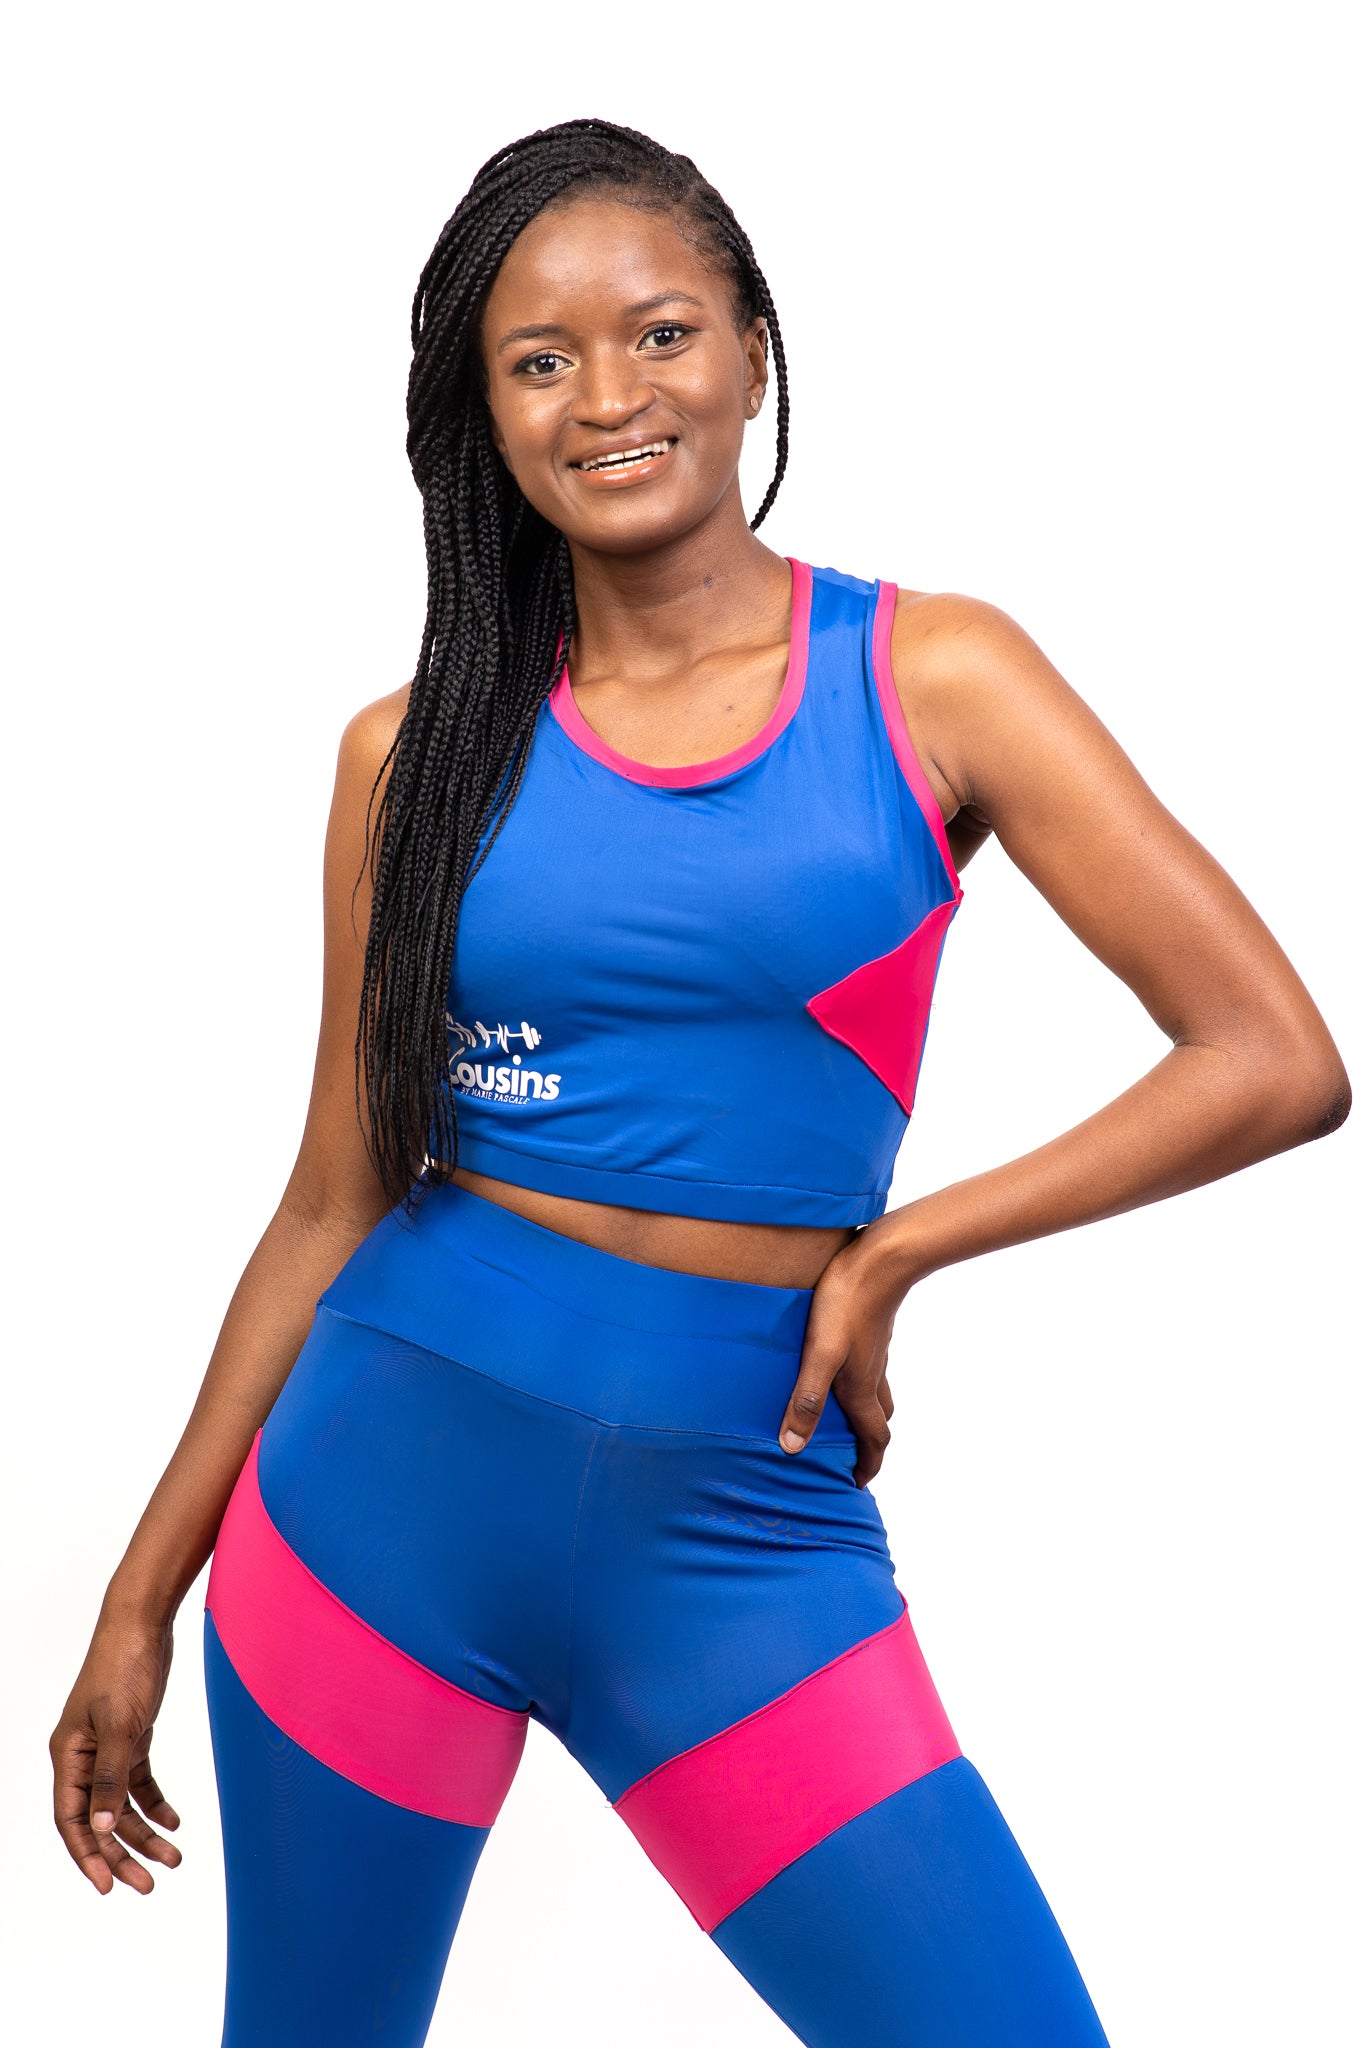 JNGSA Gym Sets For Women Cute Sets For Women Outfits Women'S